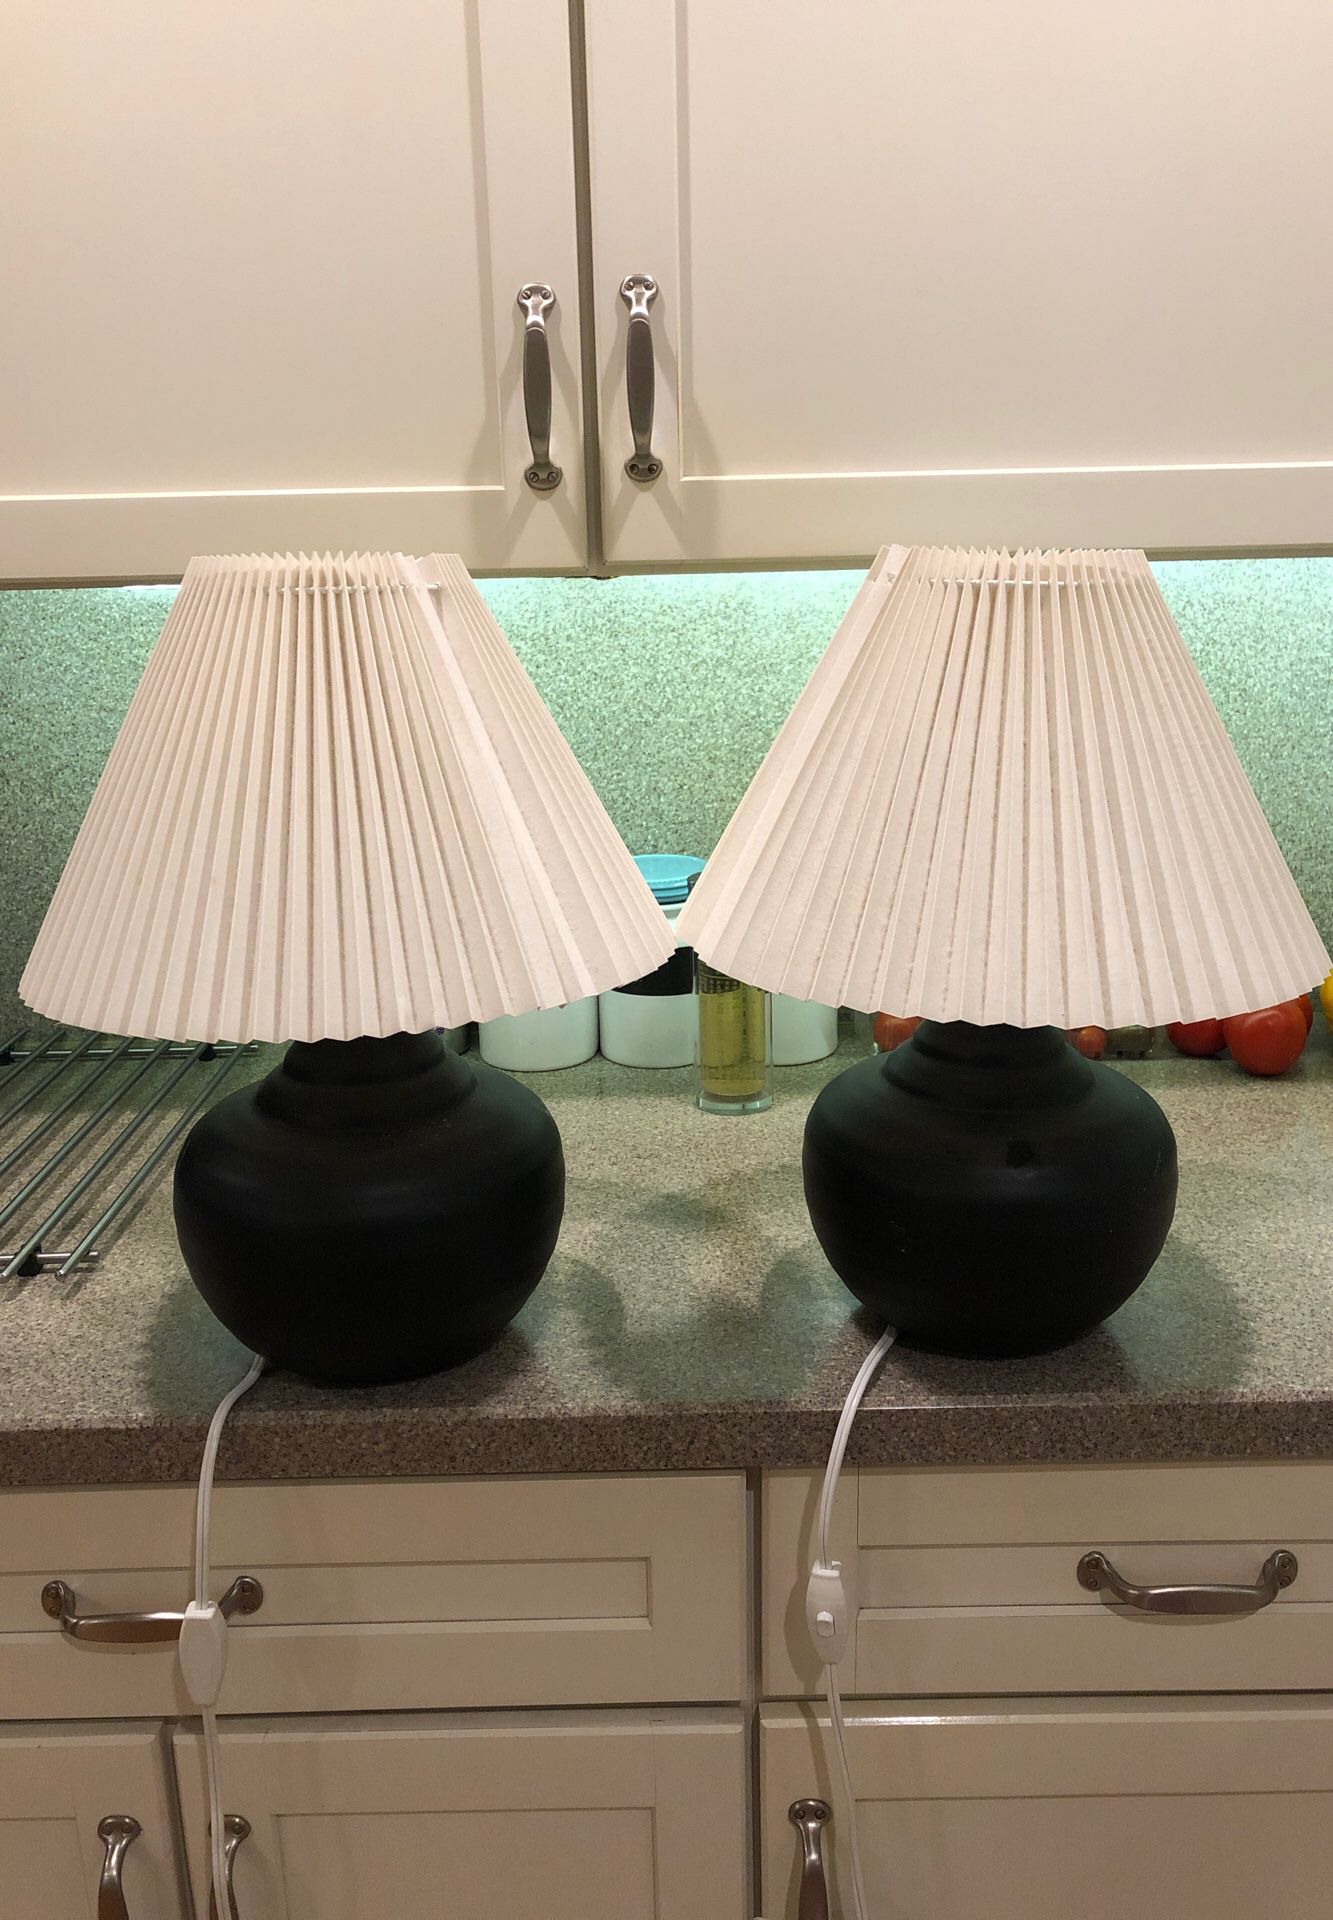 Two IKEA Black Ceramic bade table lamps